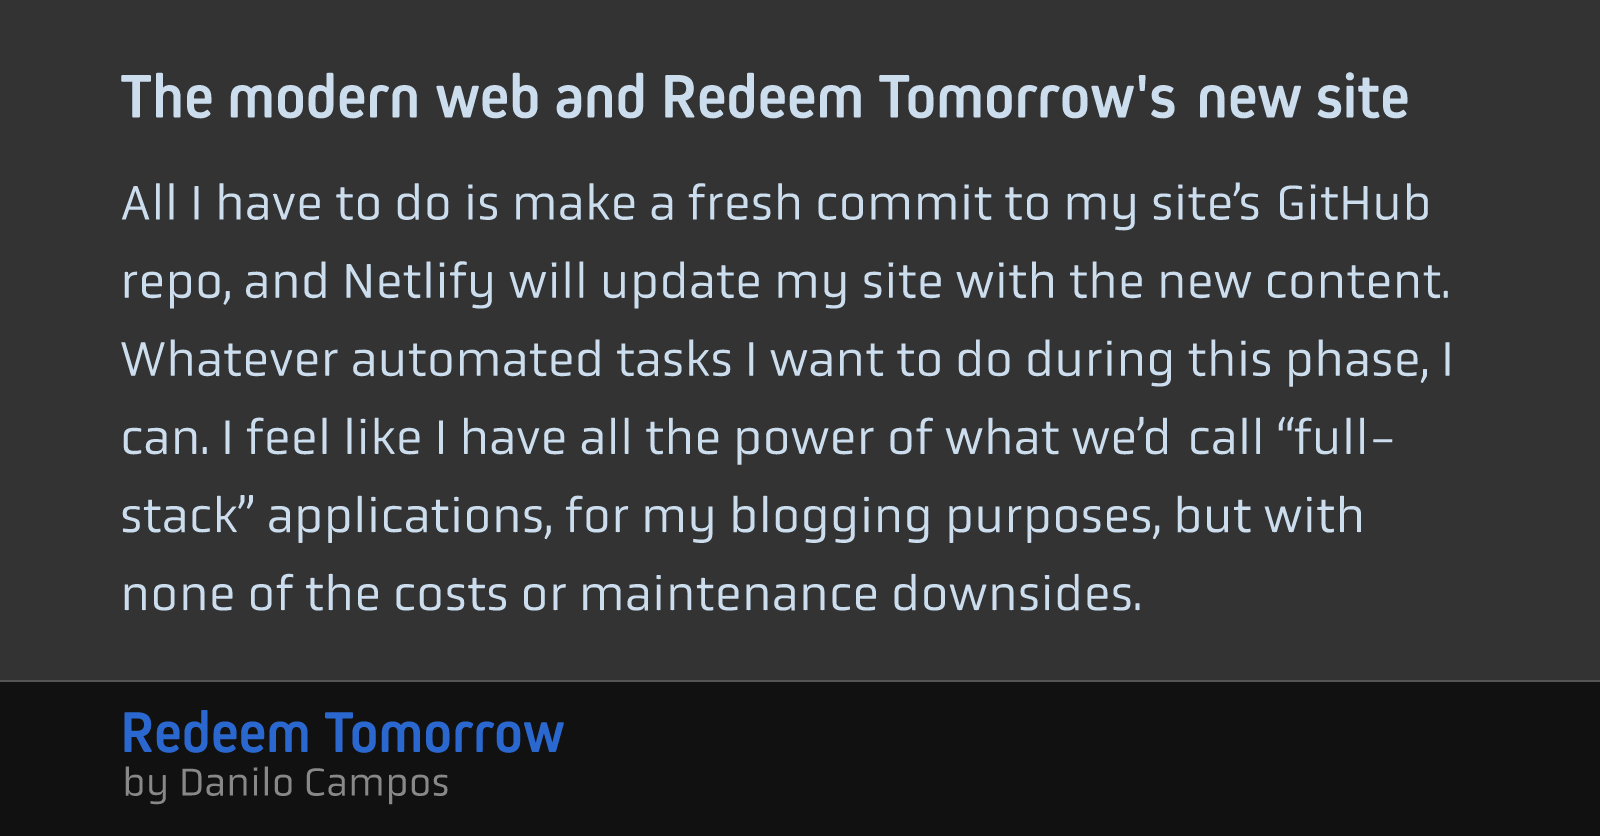 The modern web and Redeem Tomorrow's new site